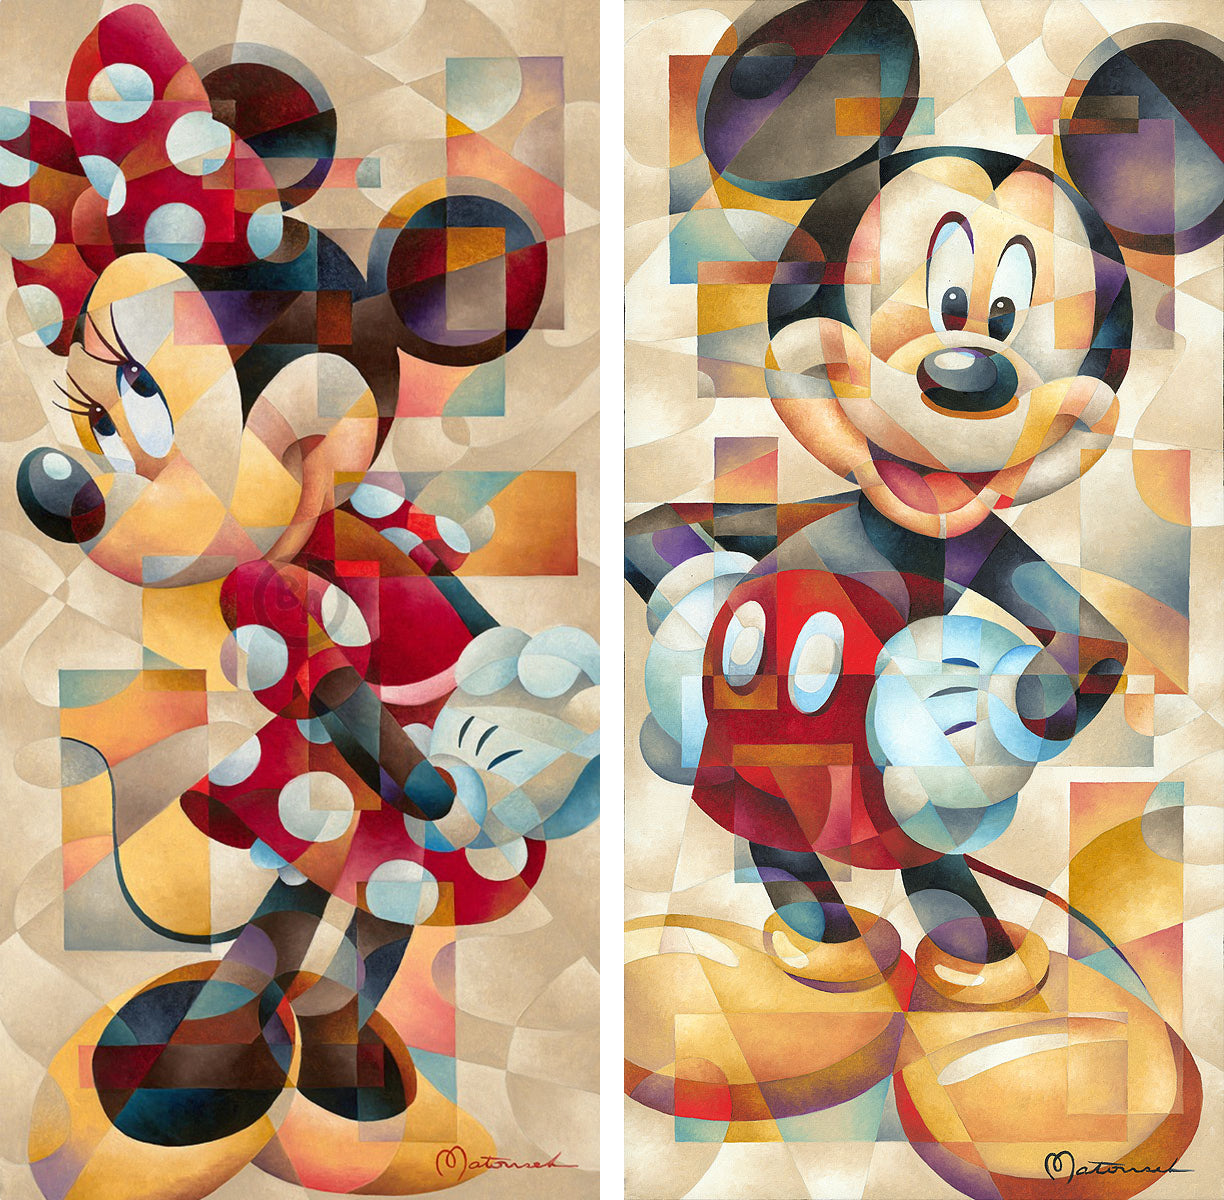 2 LOT Mickey Mouse and Minnie Mouse Walt Disney Fine Art Tom Matousek Signed Limited Editions of 195 on Canvas - Poses